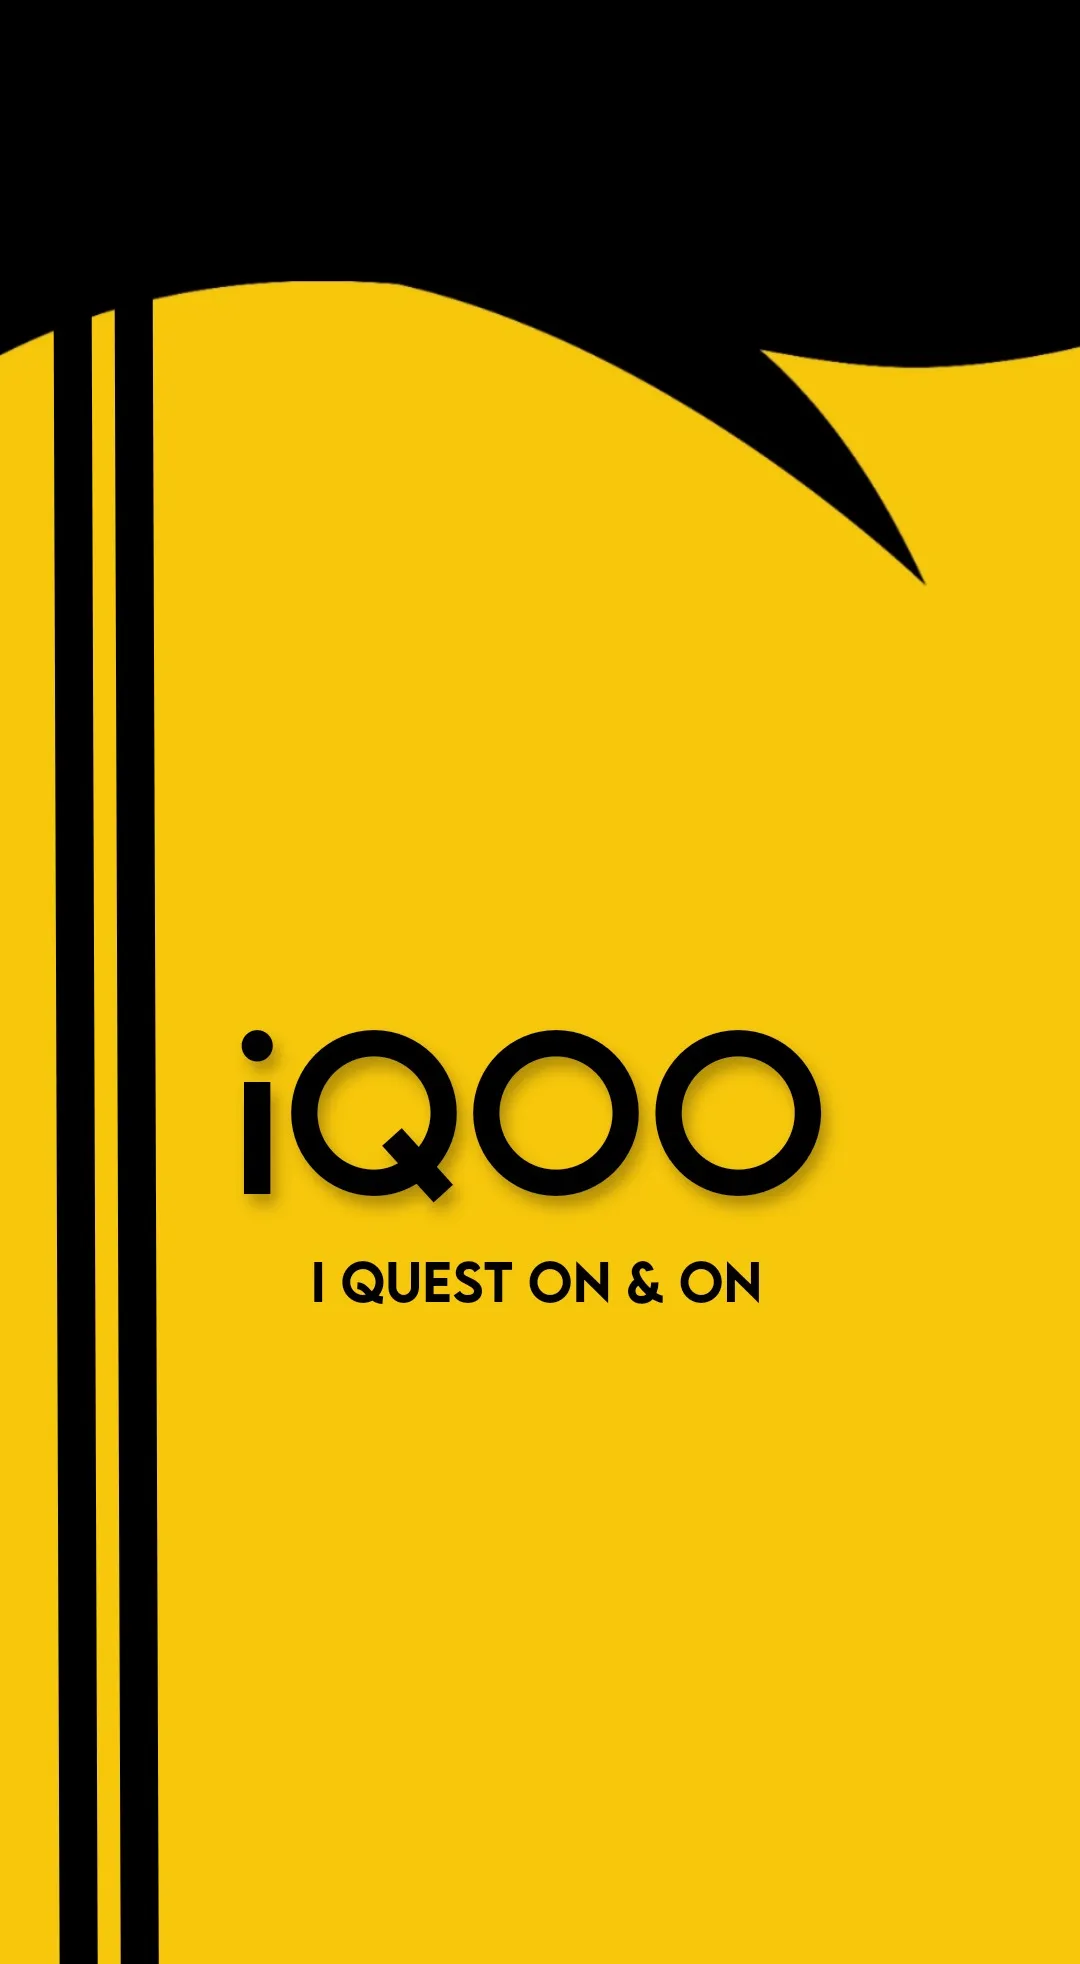 Download the Best Wallpapers for Your Iqoo Mobile Phone